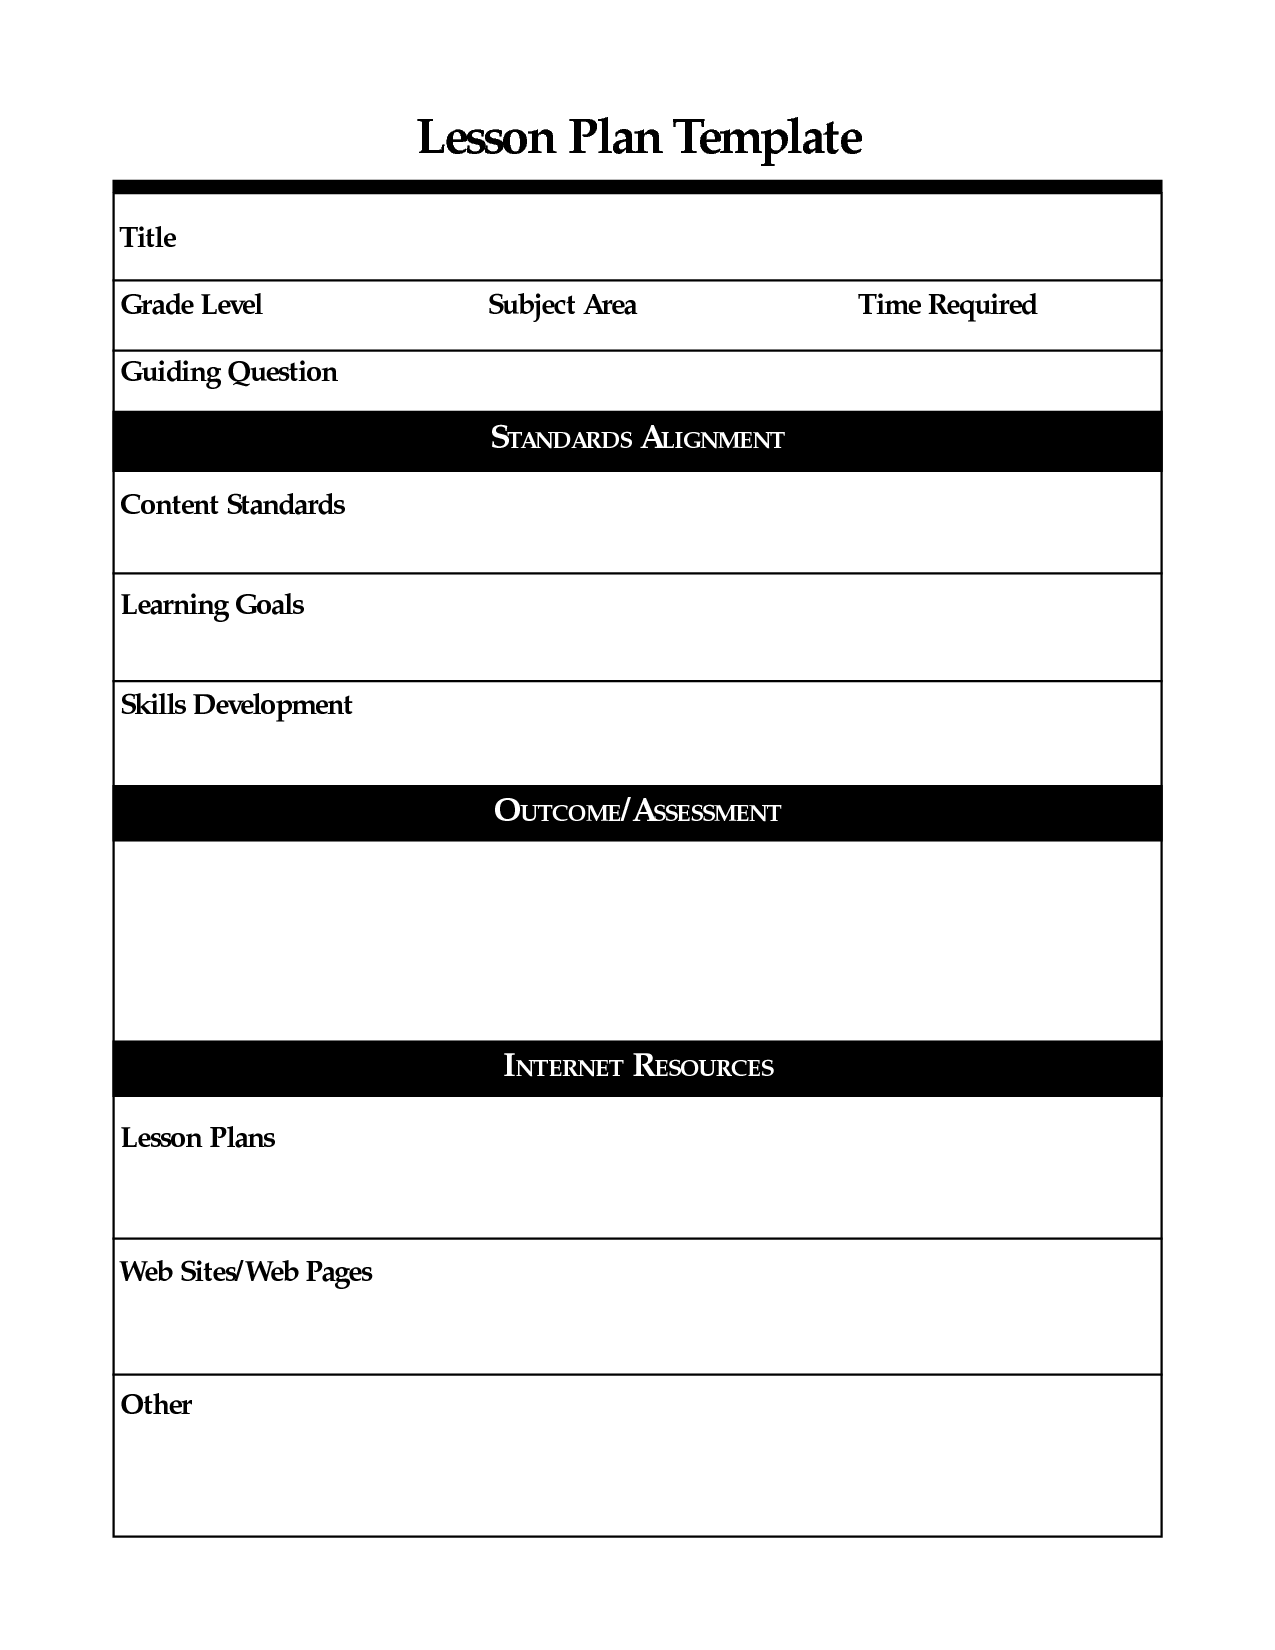 FREE To Use Printable Lesson Plan Template Lesson Plan Templates 